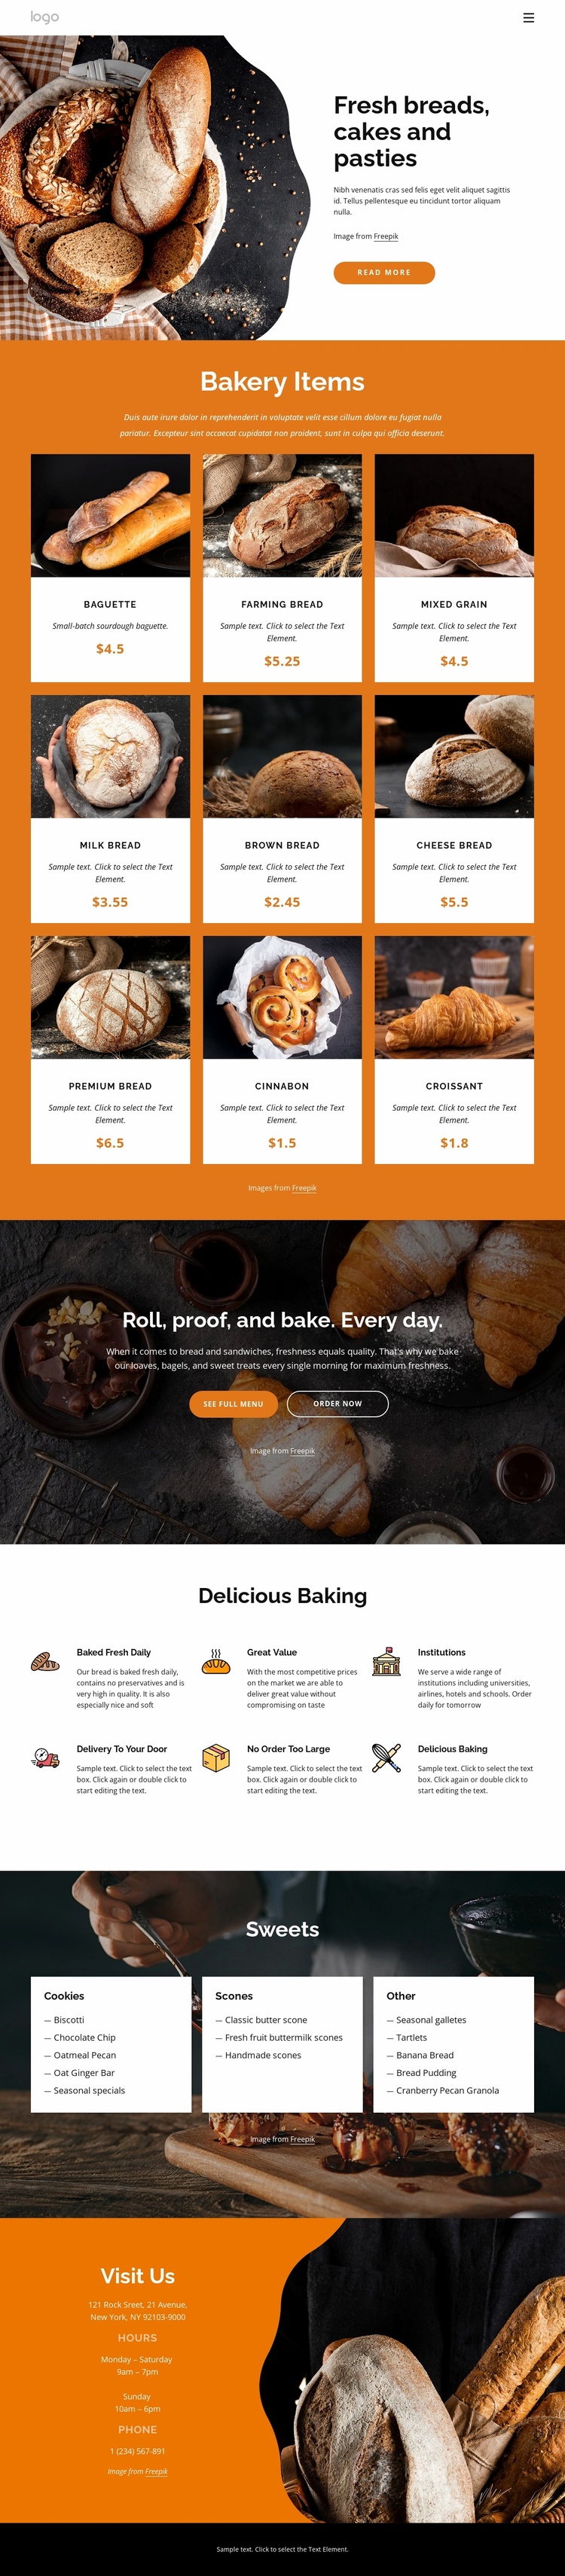 Fresh breads and cakes Website Template